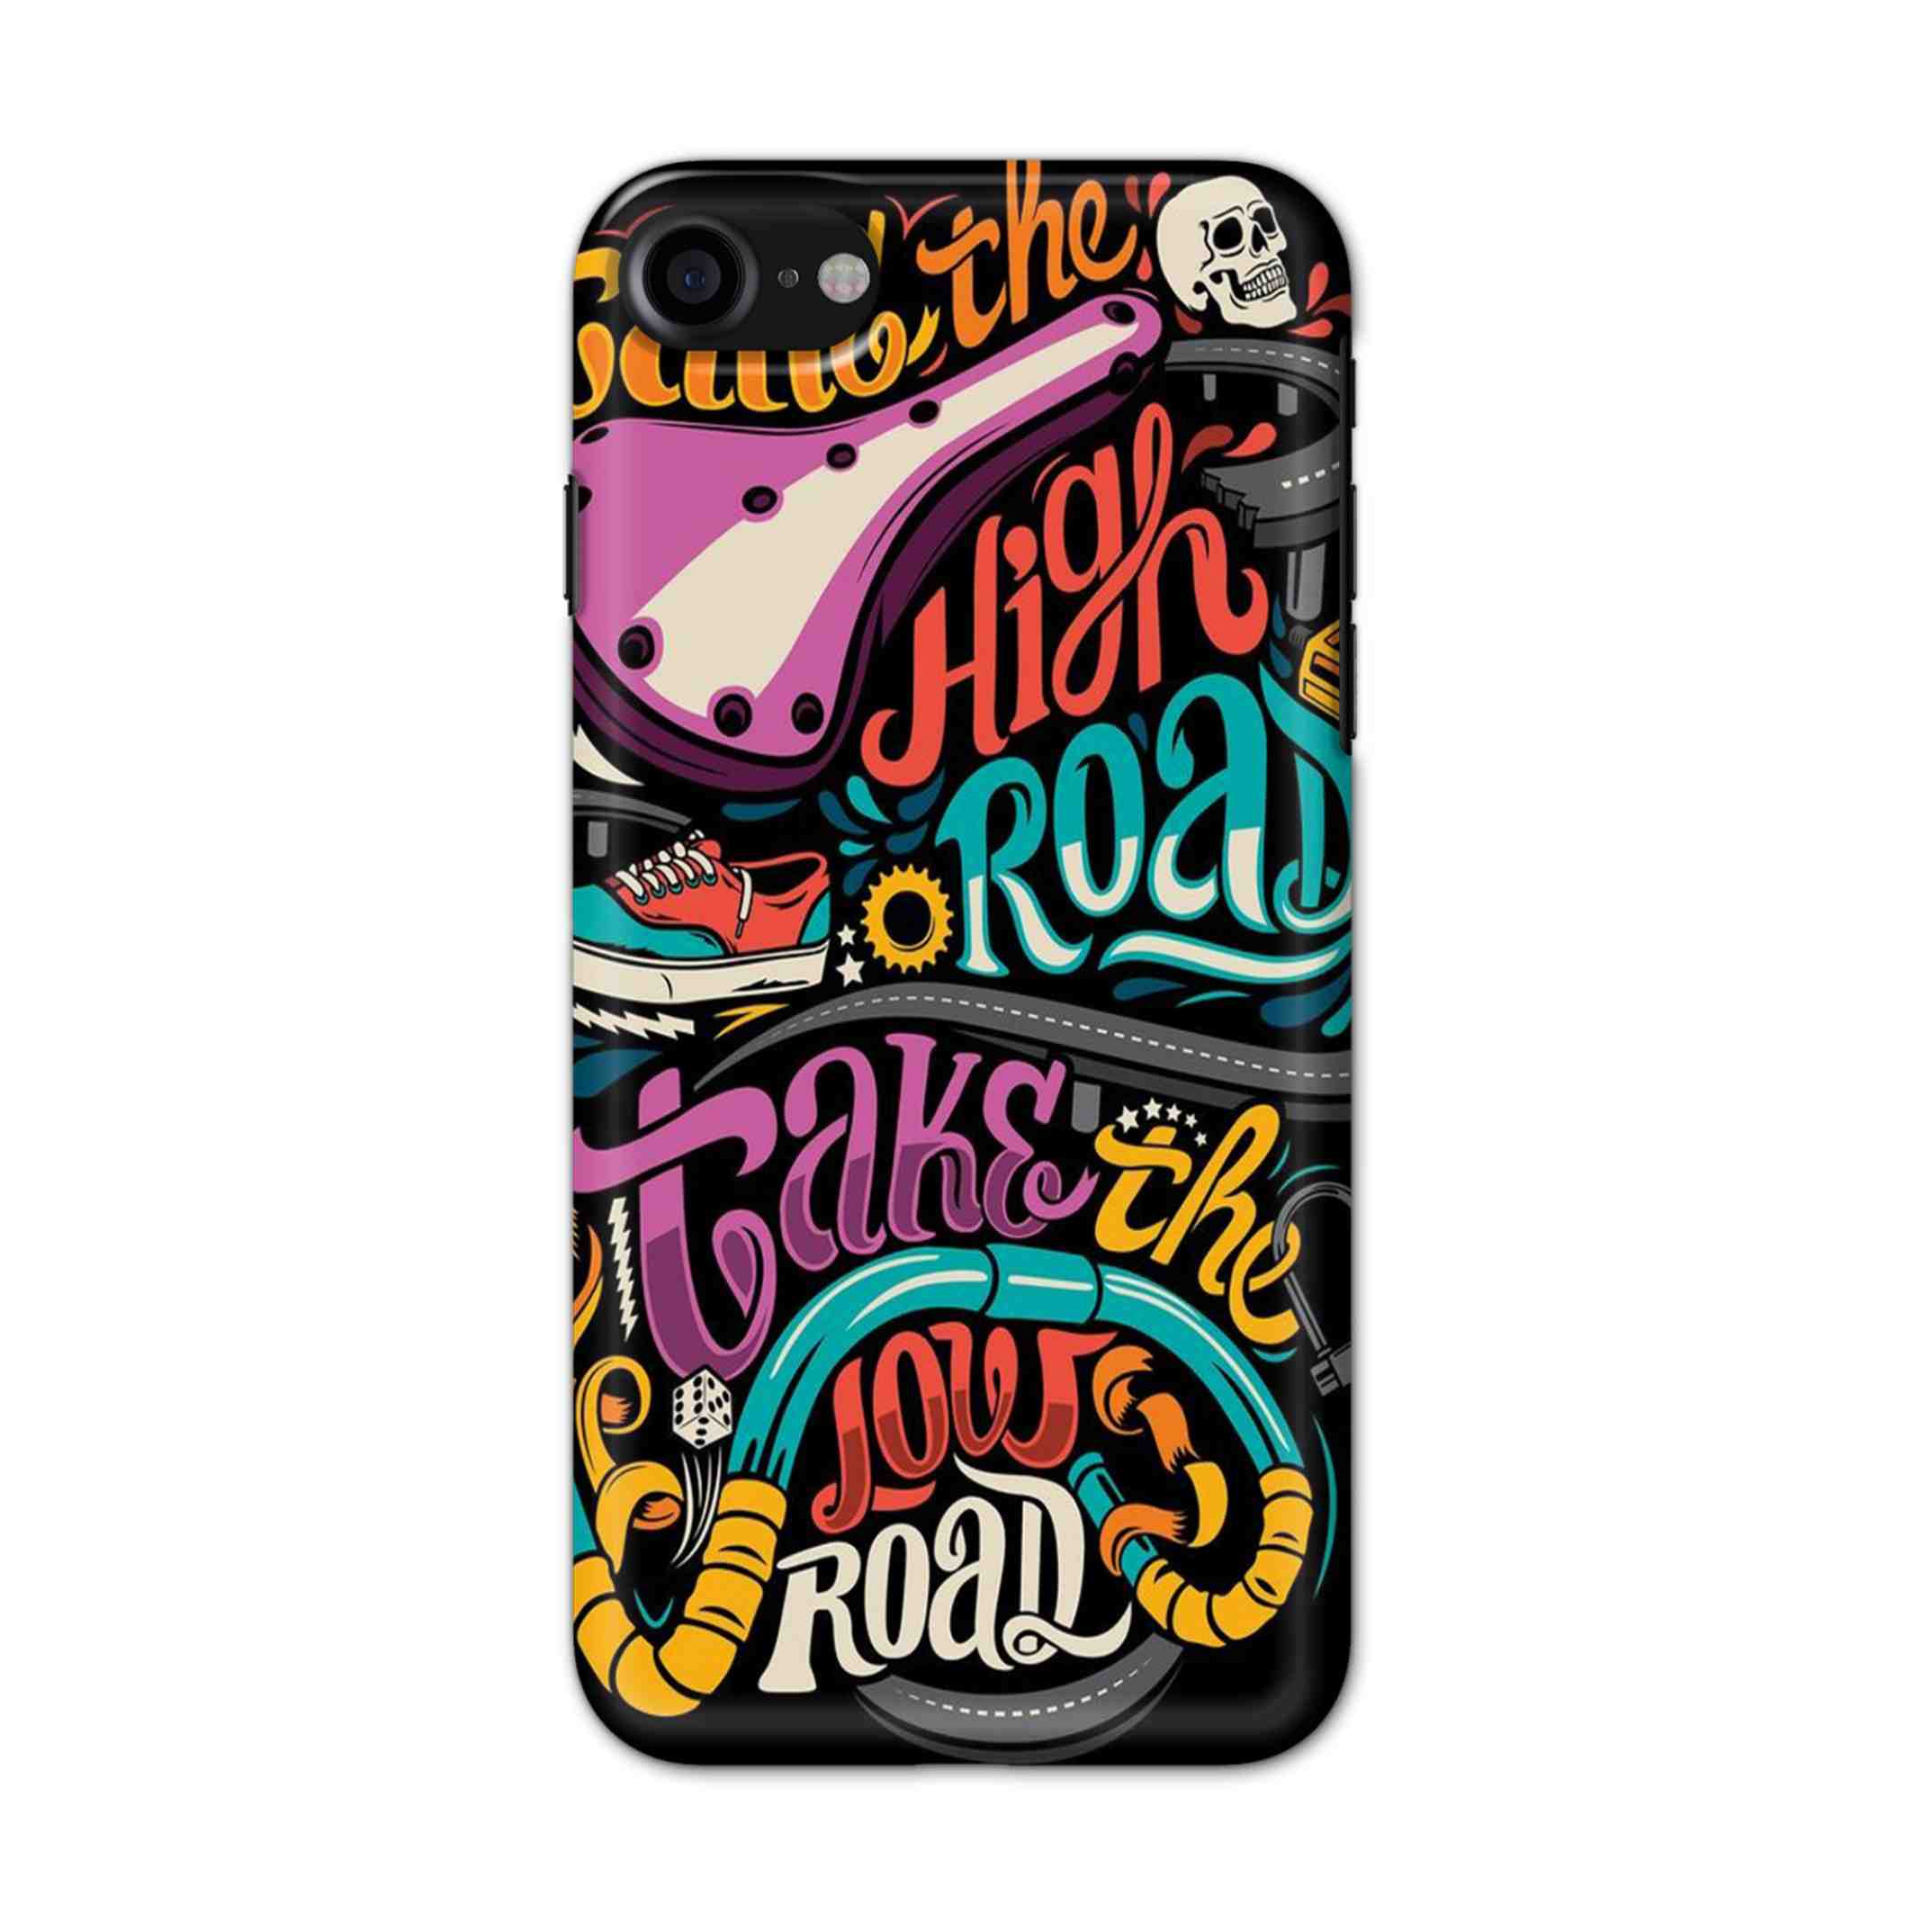 Buy Take The High Road Hard Back Mobile Phone Case/Cover For iPhone 7 / 8 Online